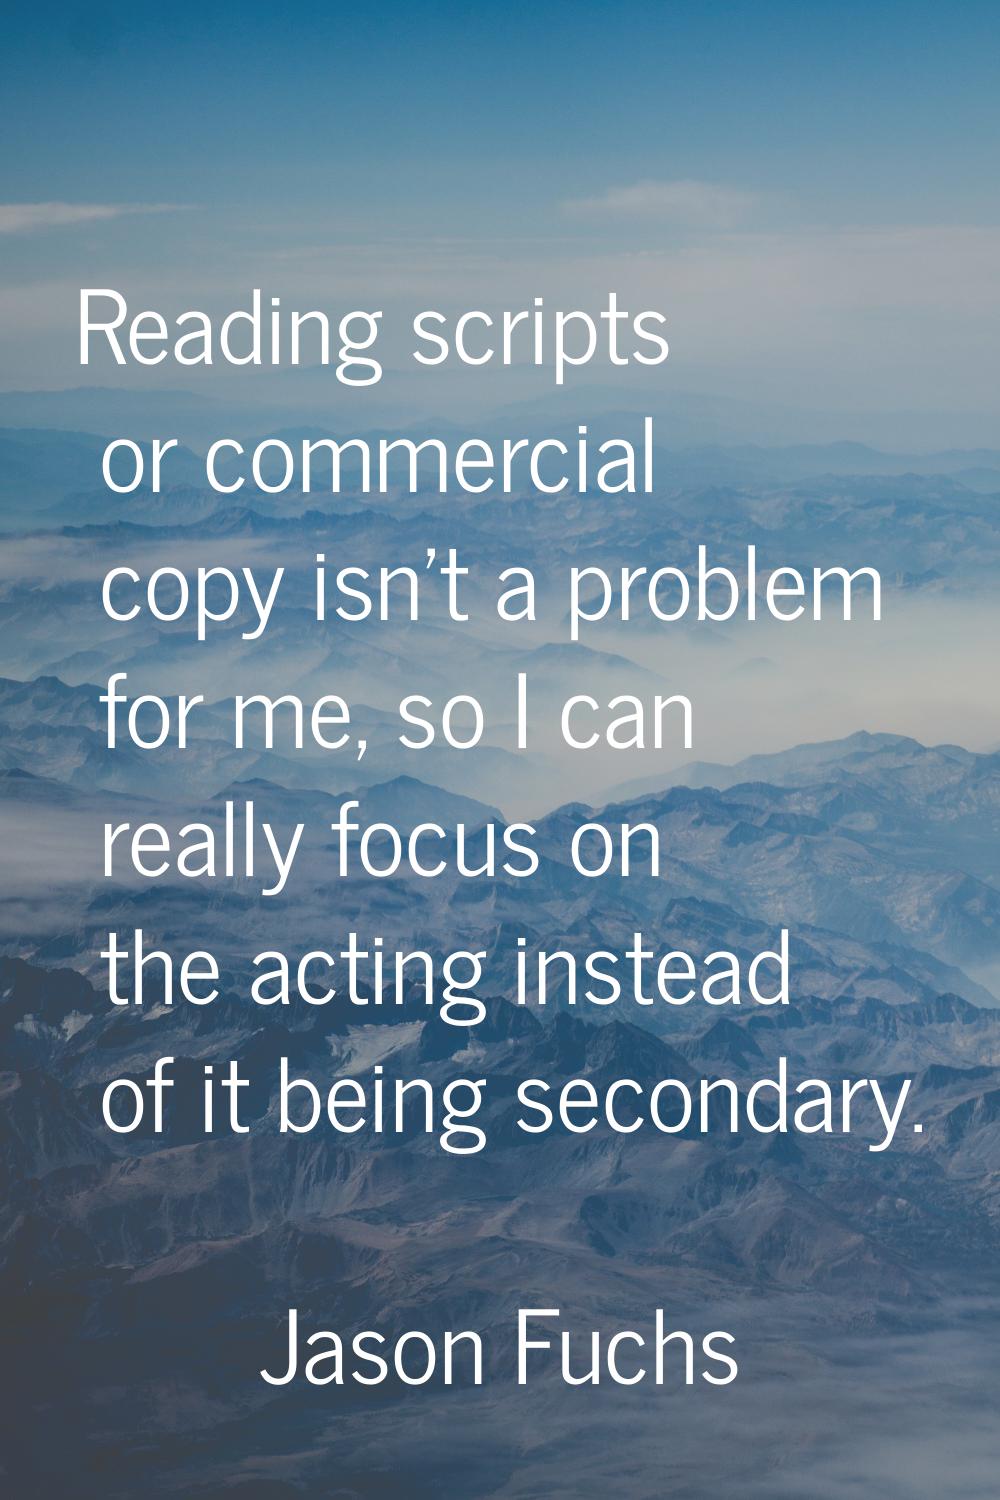 Reading scripts or commercial copy isn't a problem for me, so I can really focus on the acting inst